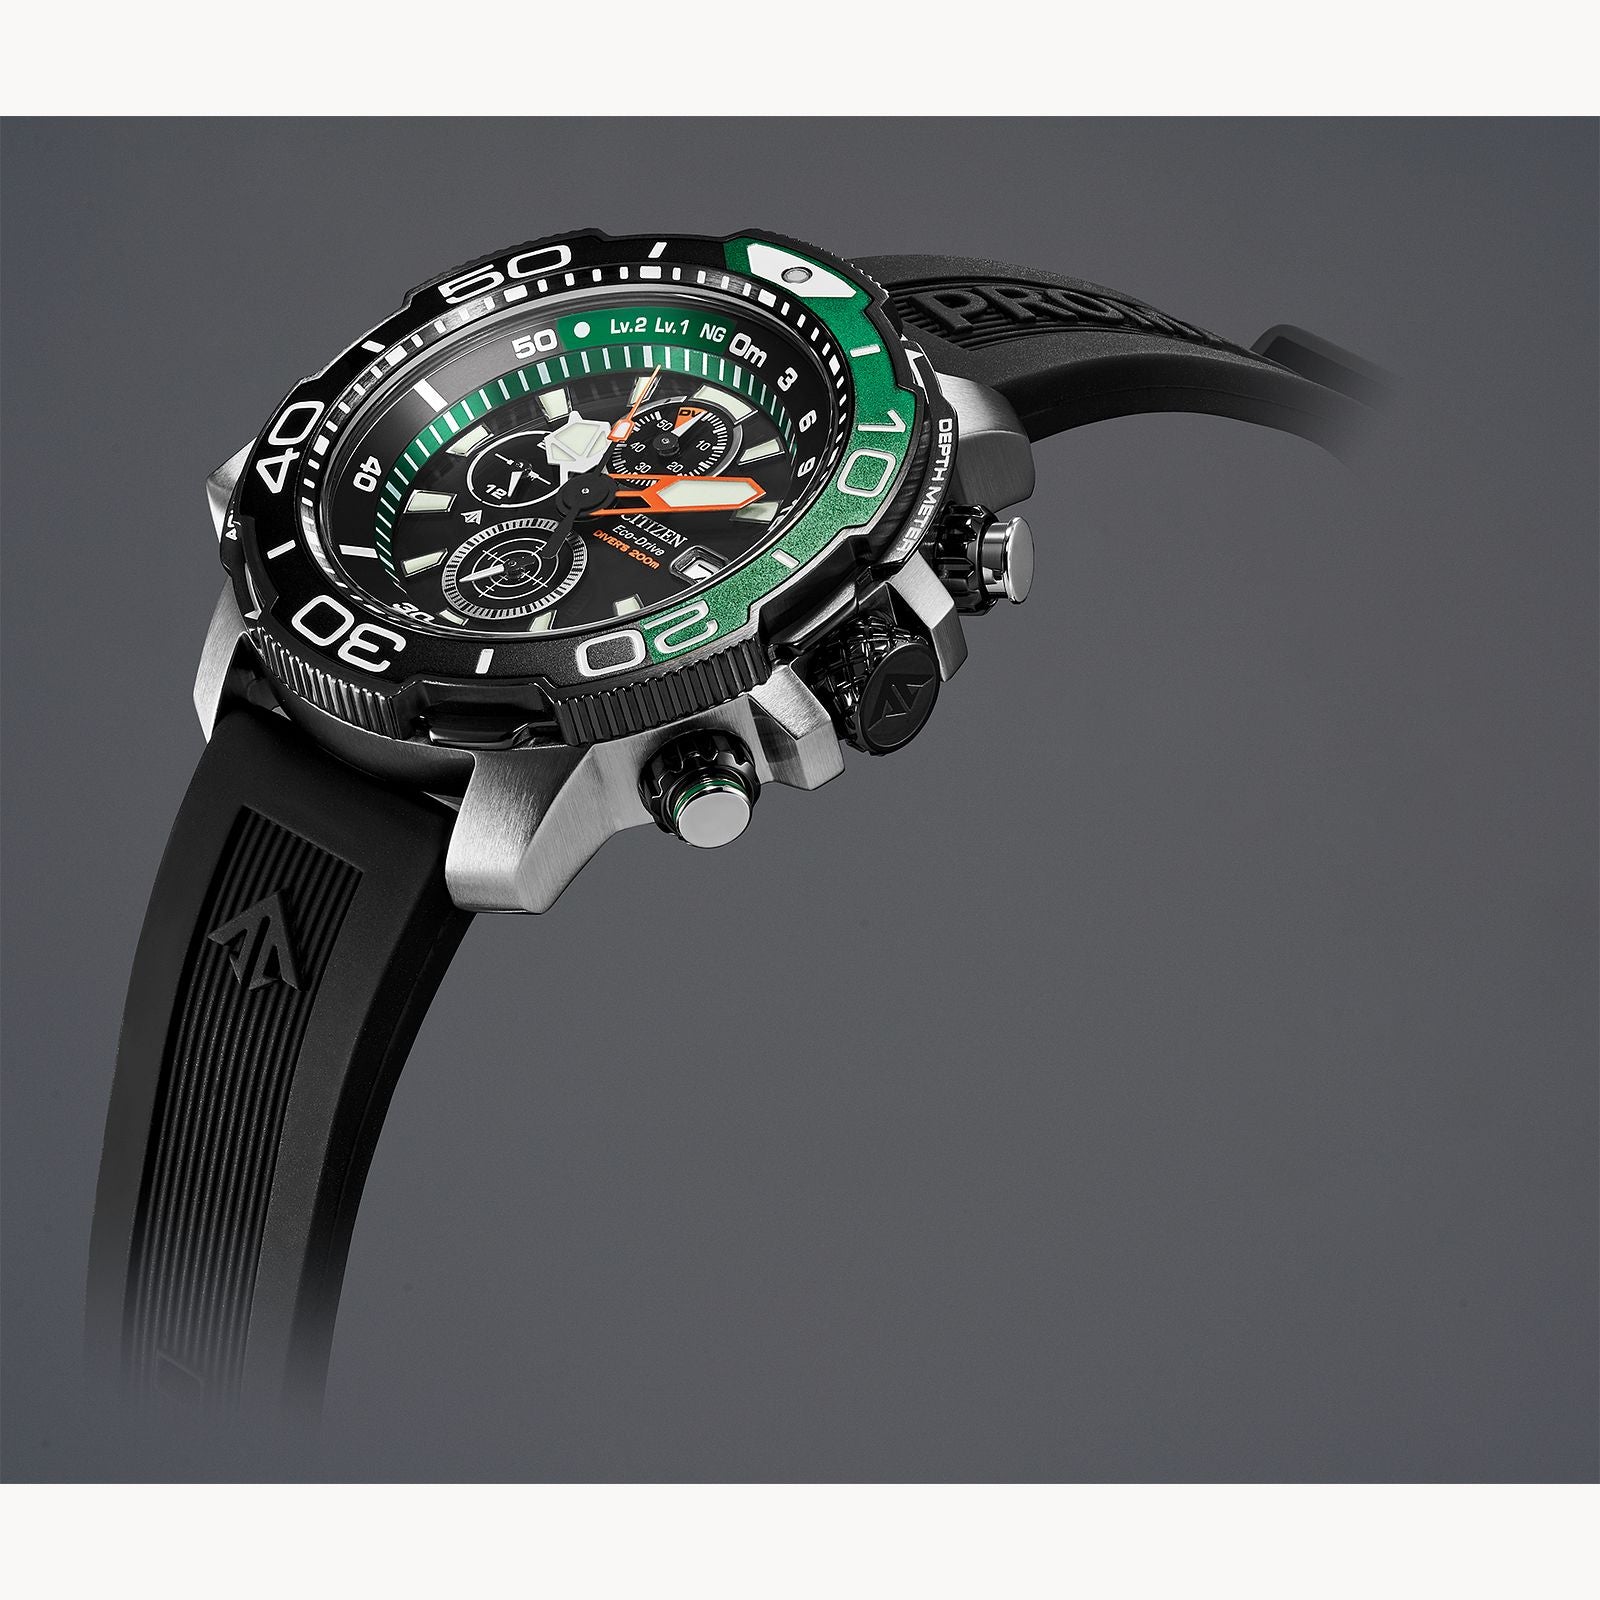 CITIZEN Launches PROMASTER Eco-Drive Aqualand 200m Professional Diver's  Watches with Light-Powered Eco-Drive Technology and an Analog Depth Meter |  CITIZEN WATCH Global Network